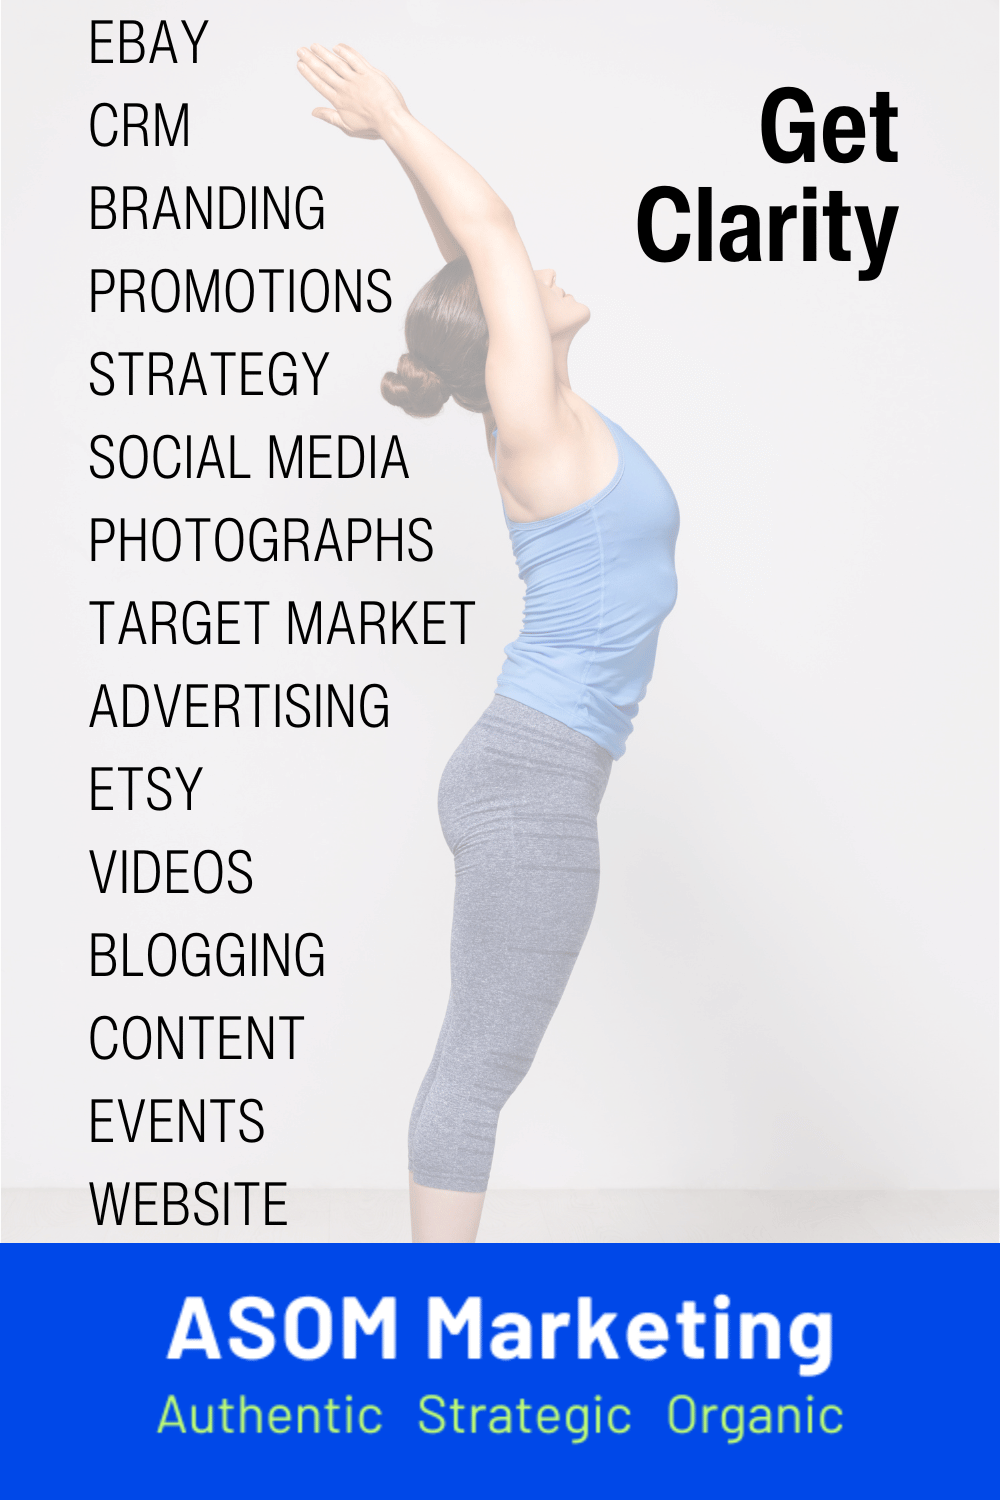 30 Minute Marketing Mentor Offer from ASOM Marketing. The image depicts a woman business owner relaxed and doing yoga with the message "get clarity"